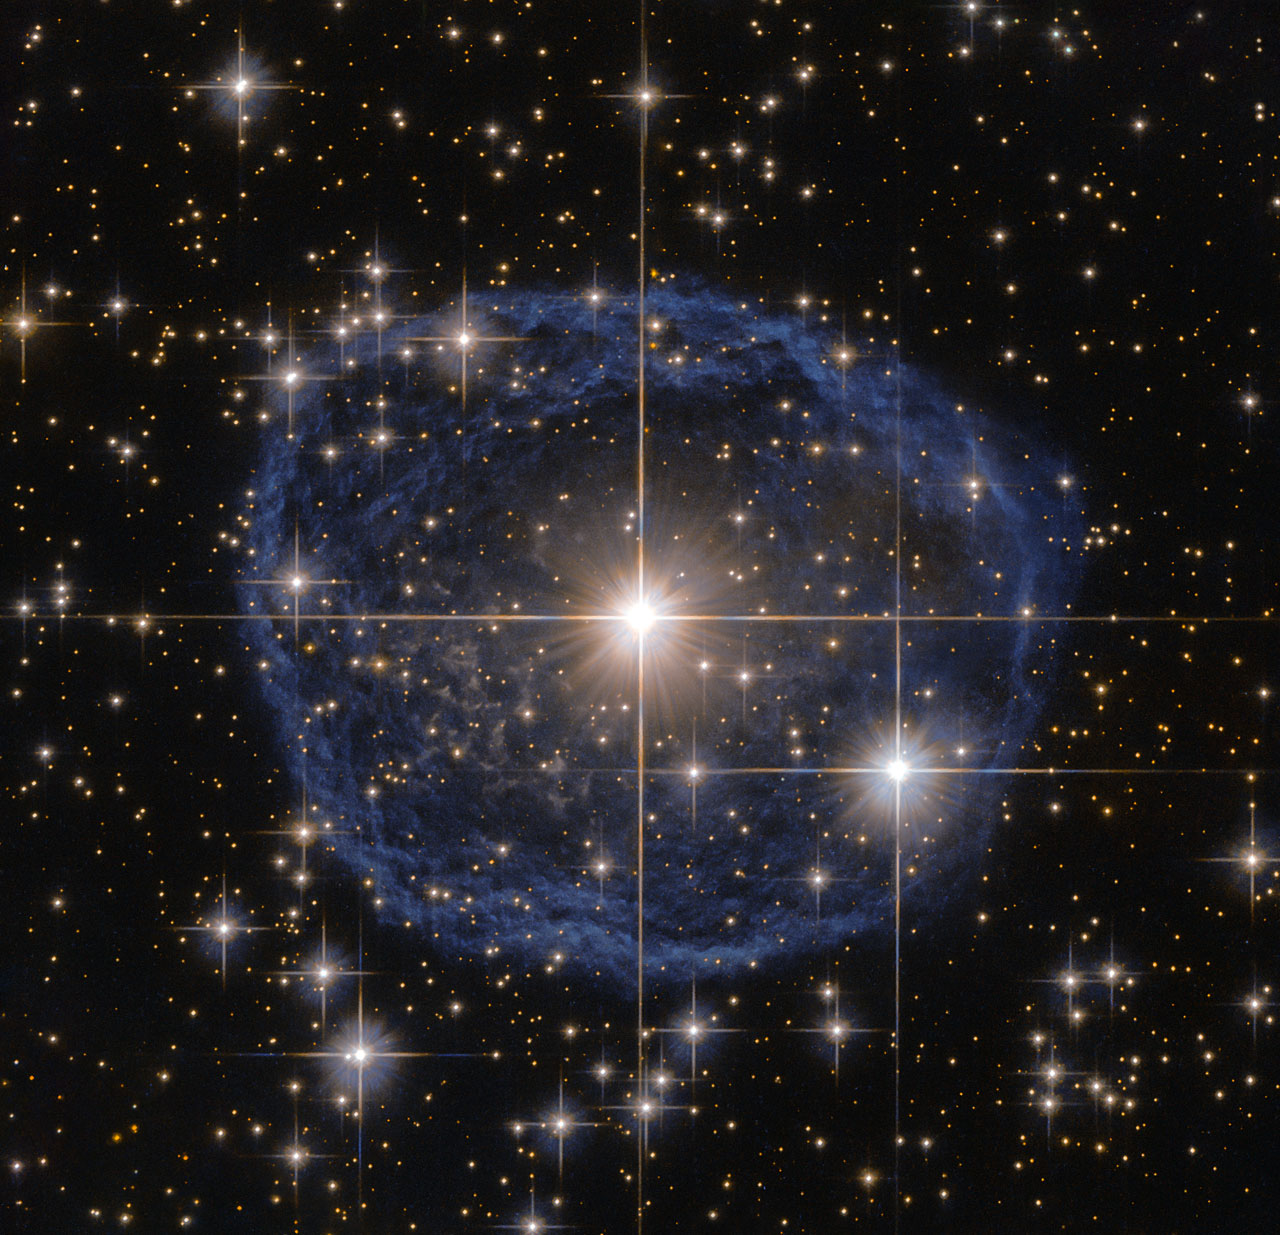 The wolf-rayet star wr 31a.